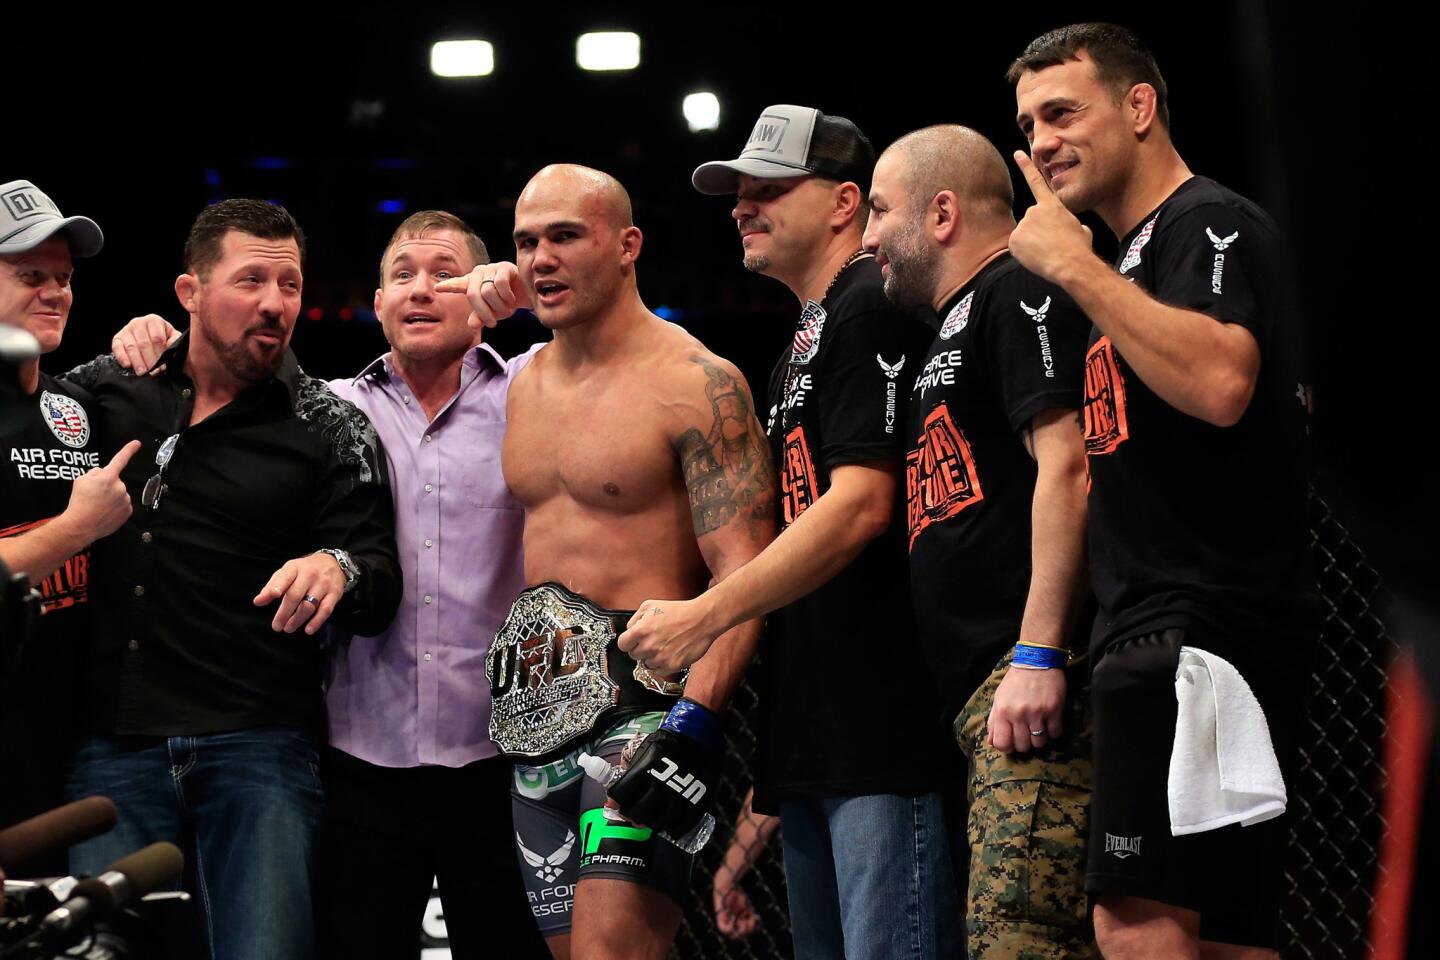 Robbie Lawler celebrates after earning the UFC welterweight belt Saturday by defeating Johny Hendricks in Las Vegas.